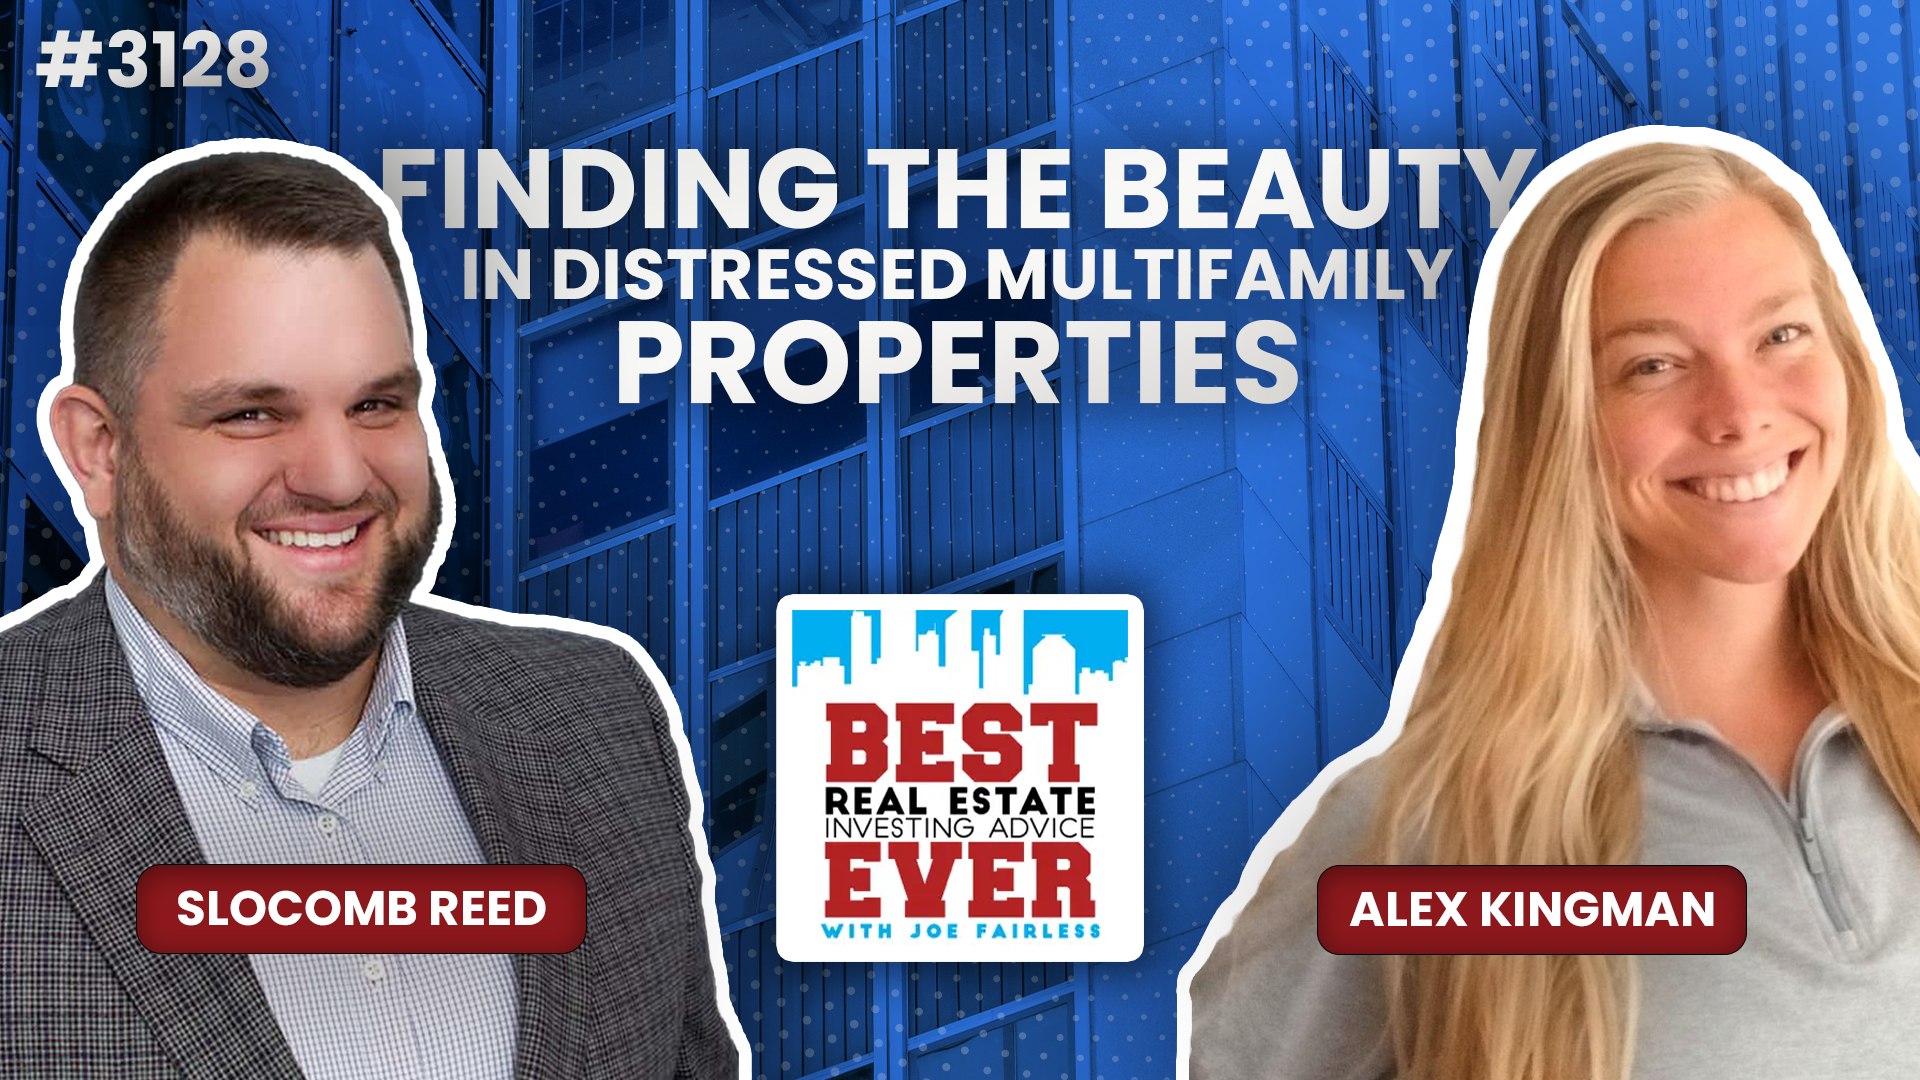 JF3128: Finding the Beauty in Distressed Multifamily Properties ft. Alex Kingman